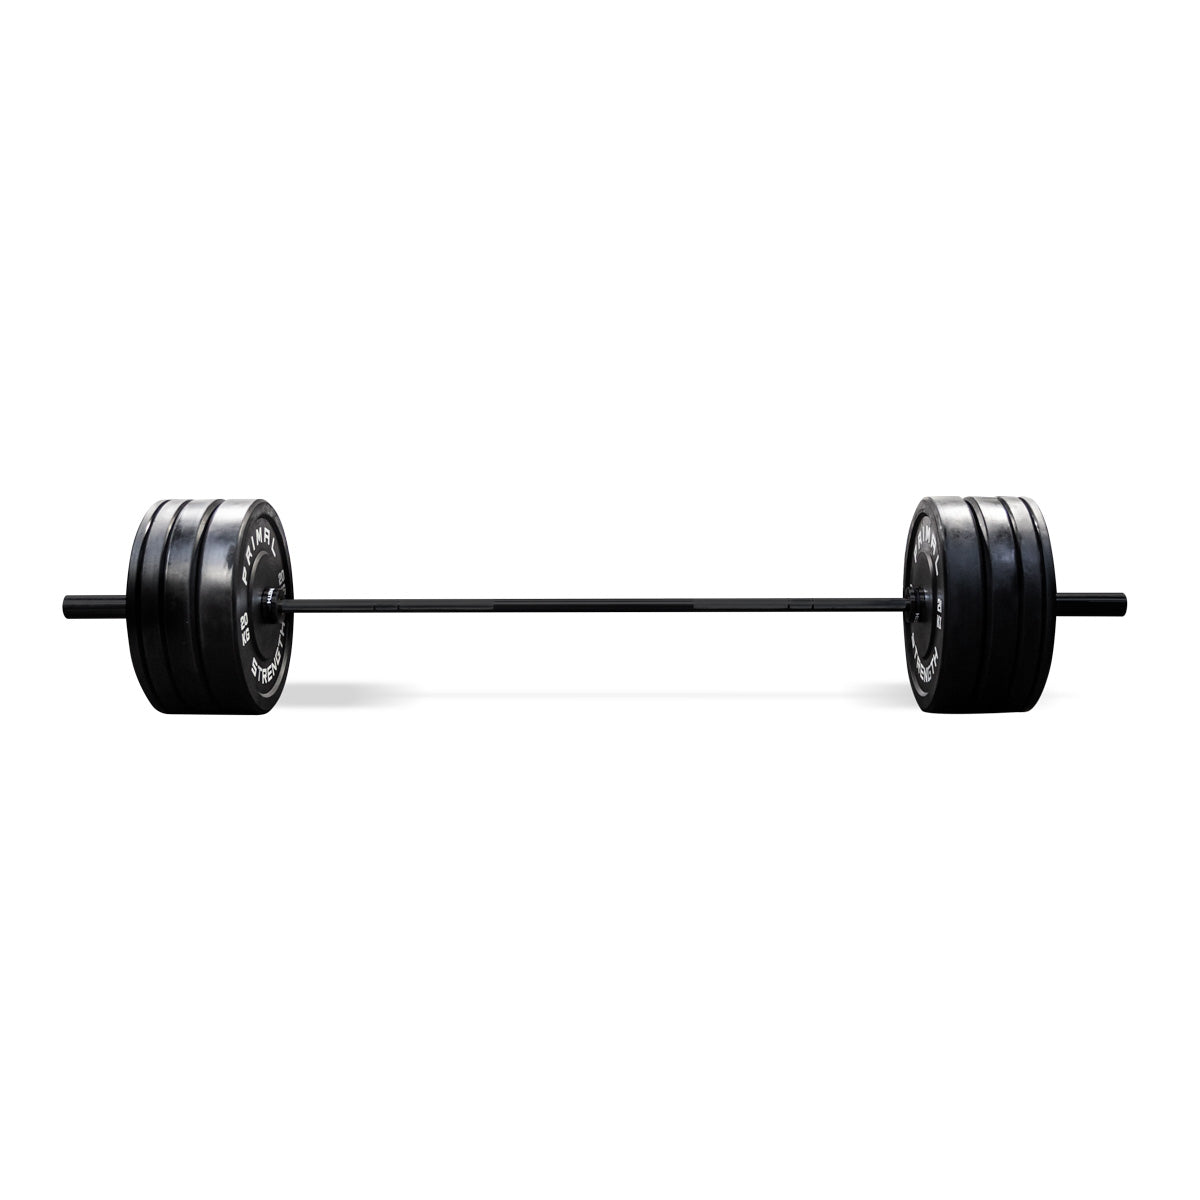 a black olympic barbell loaded with 120kg of bumper plates